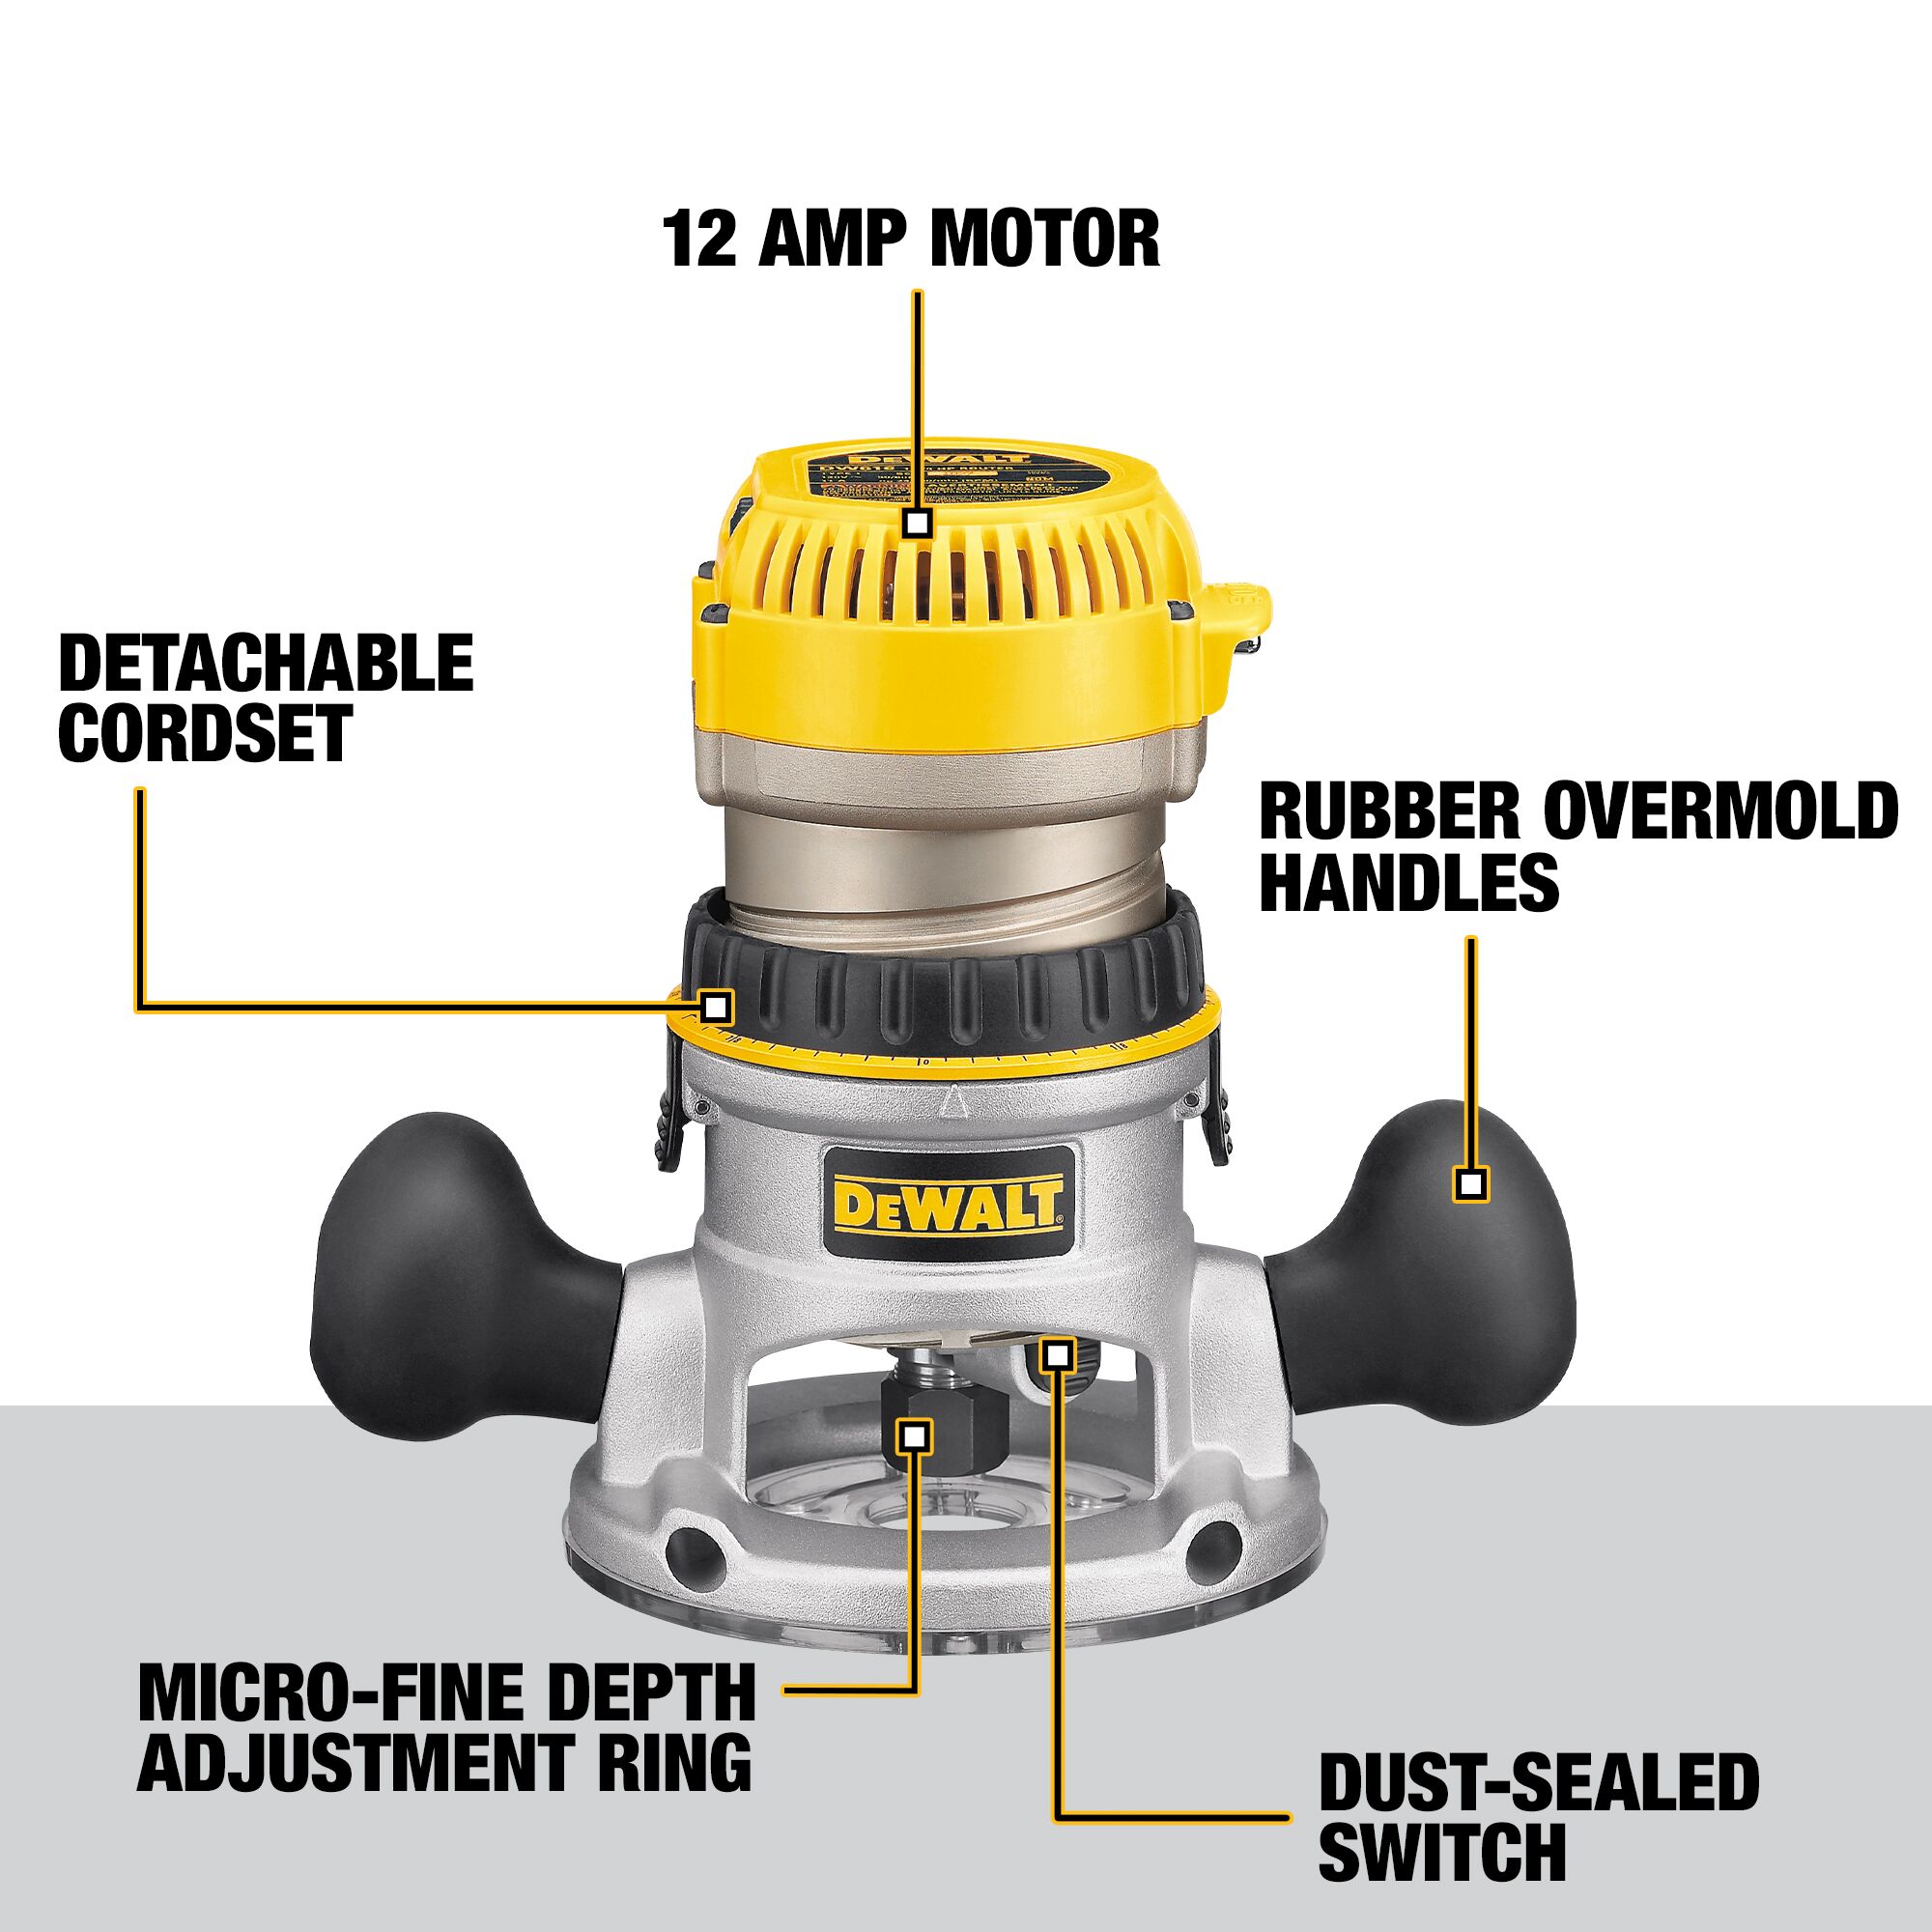 DEWALT DW618PKB 1/4-in and 1/2-in-Amp 2.25-HP Variable Speed Combo Fixed/Plunge Corded Router Soft Case (Tool Only) - 1